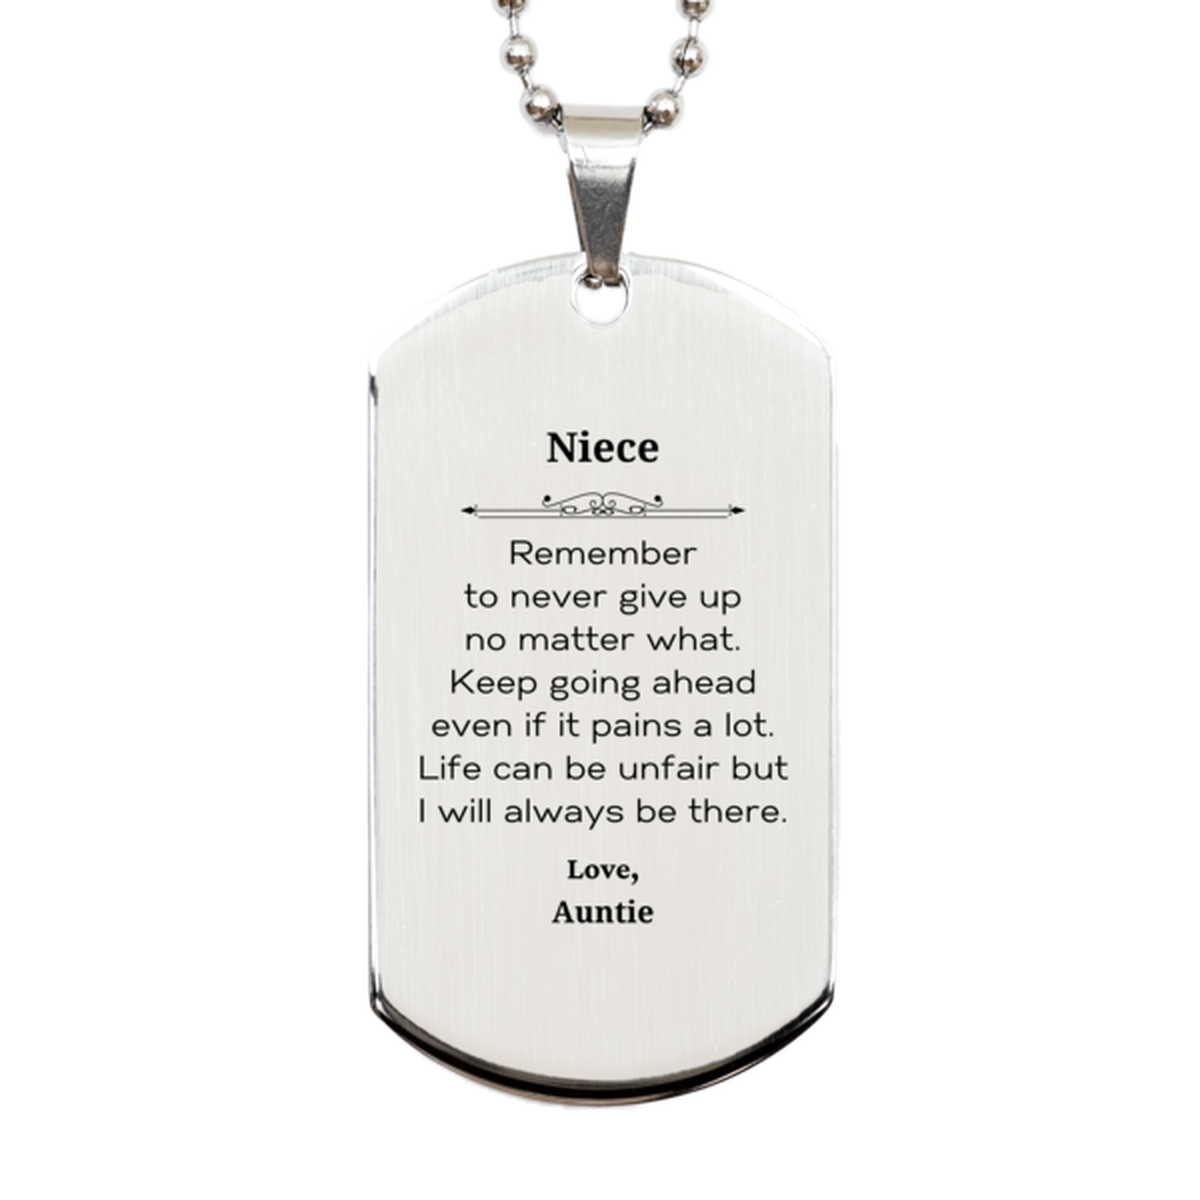 Niece Motivational Gifts from Auntie, Remember to never give up no matter what, Inspirational Birthday Silver Dog Tag for Niece